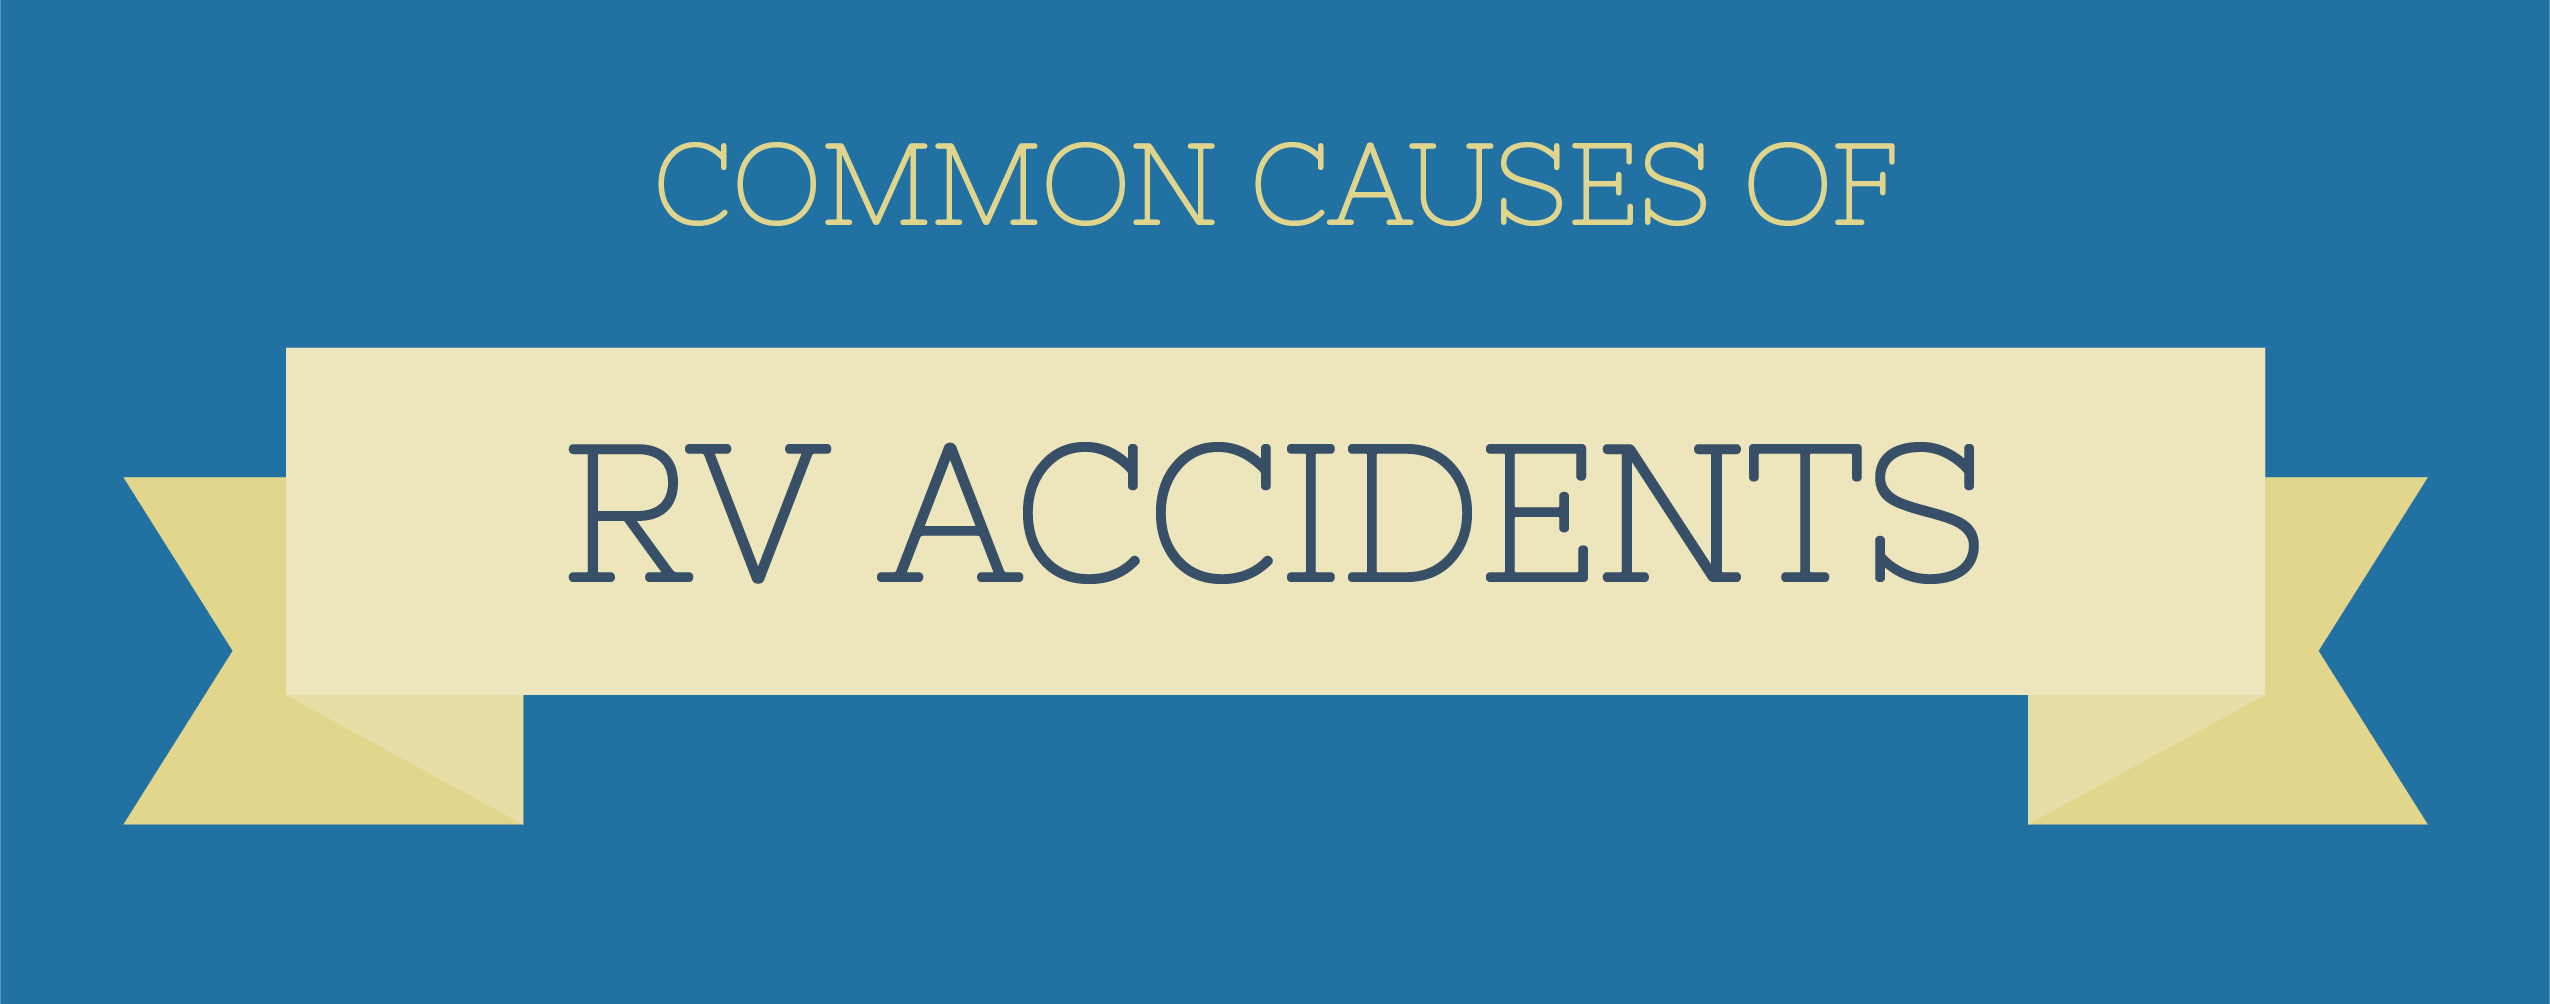 common causes of RV accidents infographic header